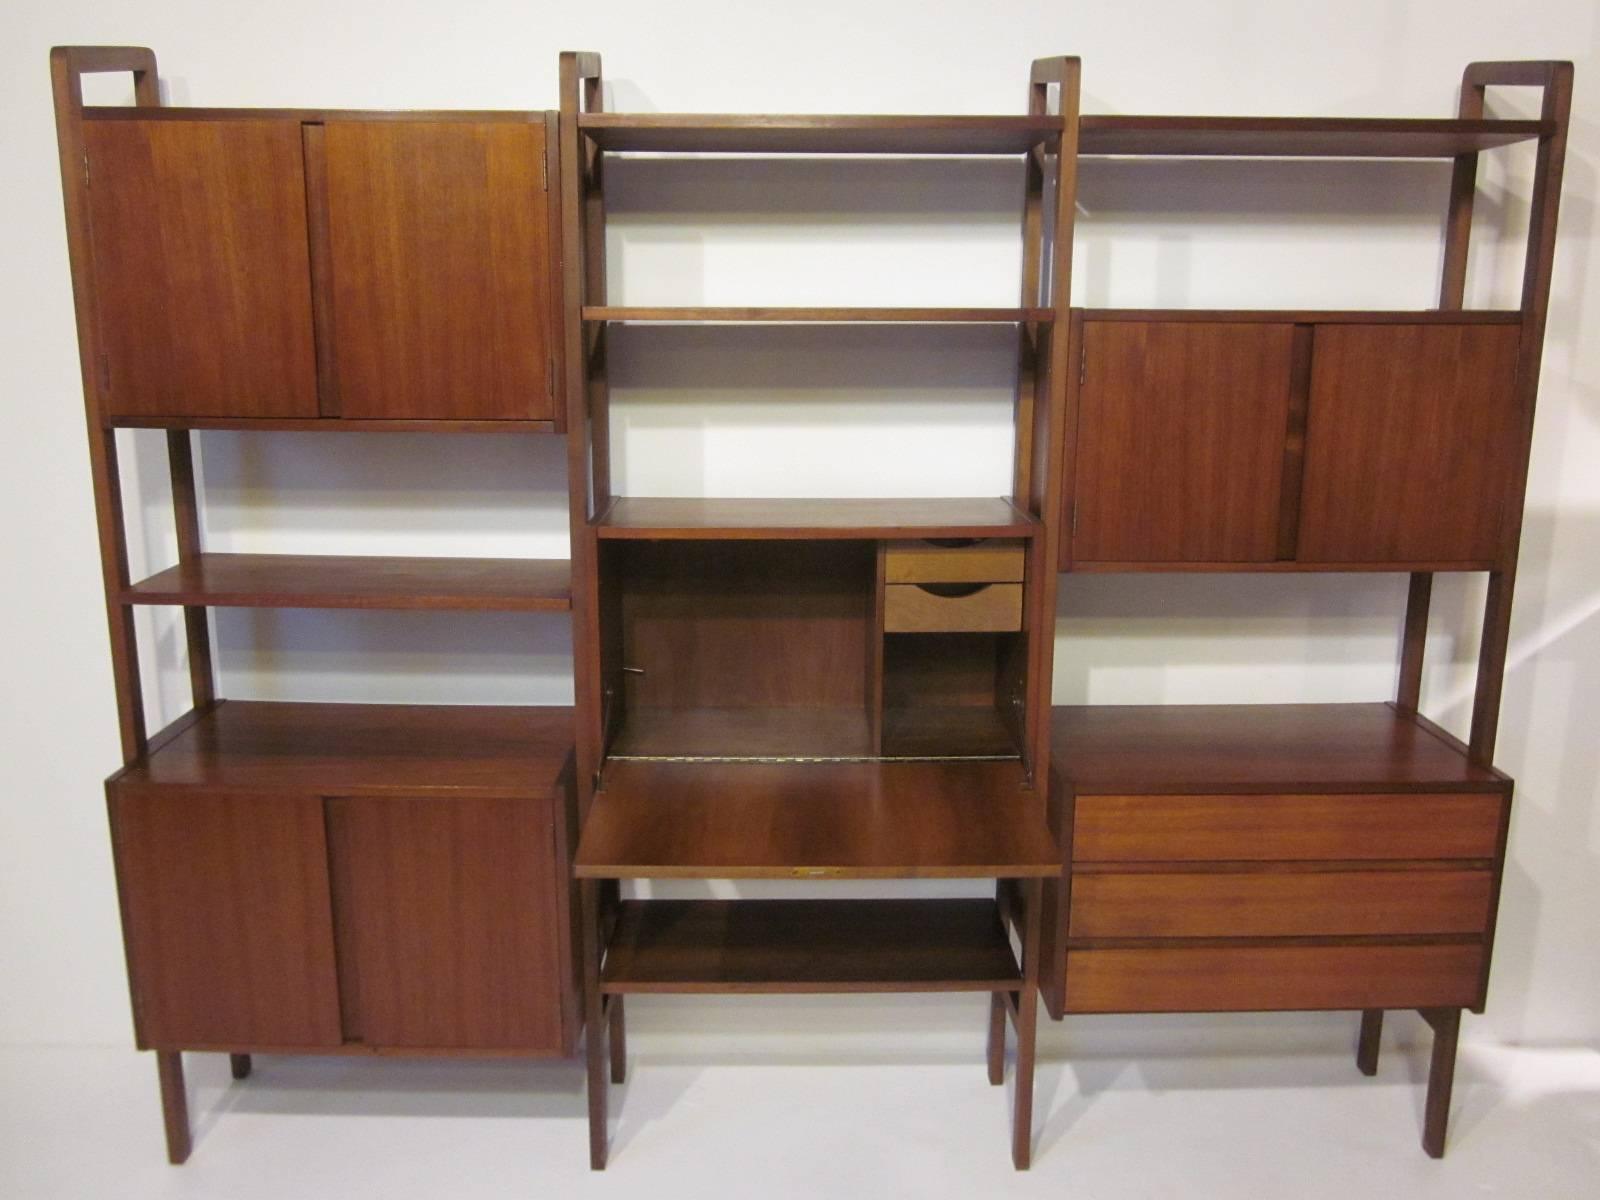 A three section walnut wall unit with center desk and drawers, three double door storage boxes with shelves, one three-drawer box and four adjustable shelves. It's free standing so no need for wall mounting or unneeded holes or ceiling mounts like